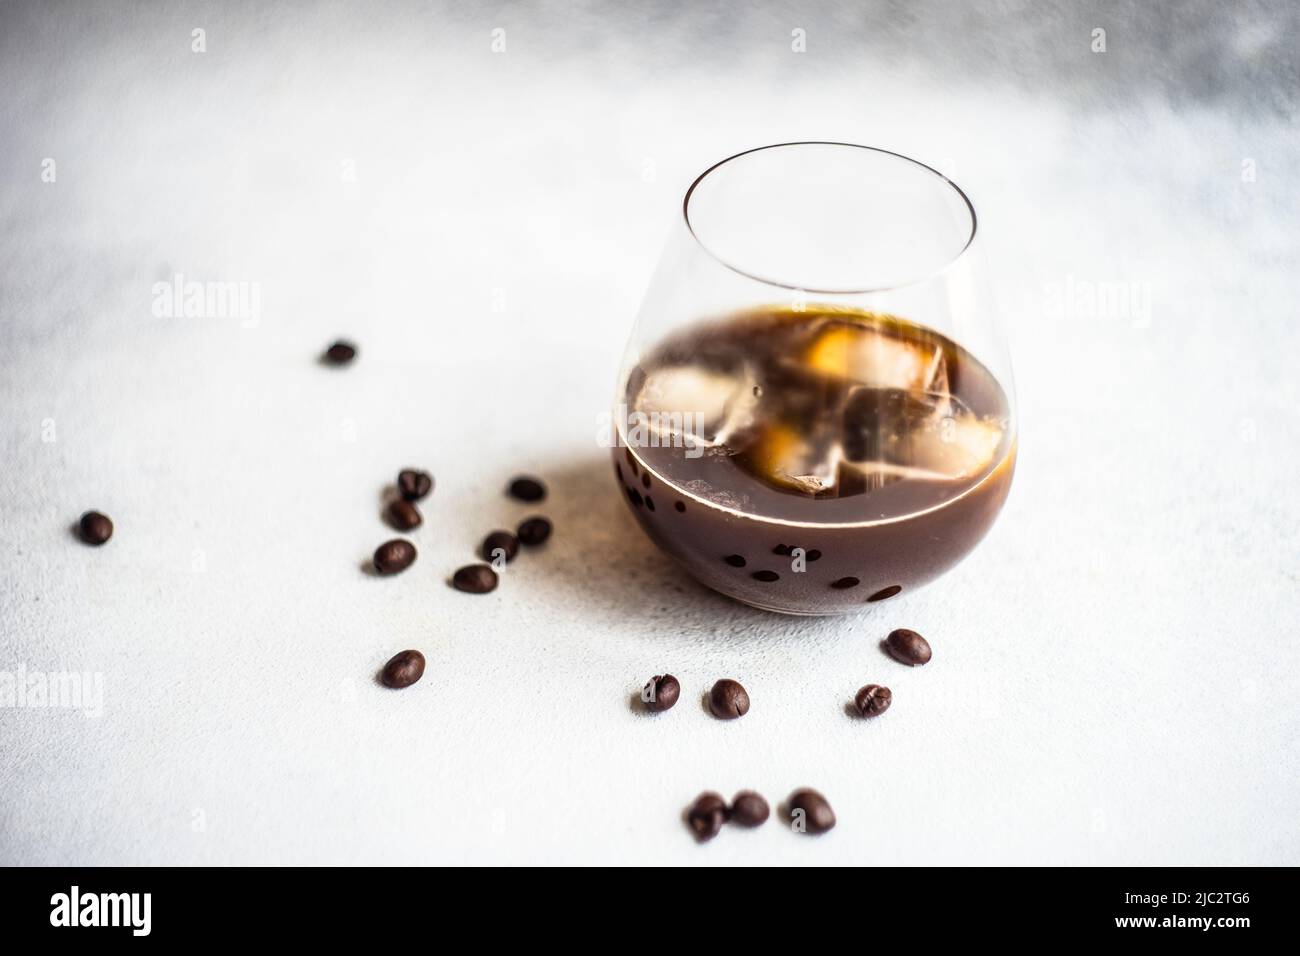 Close-up of an iced coffee drink on a table with roasted coffee beans Stock Photo